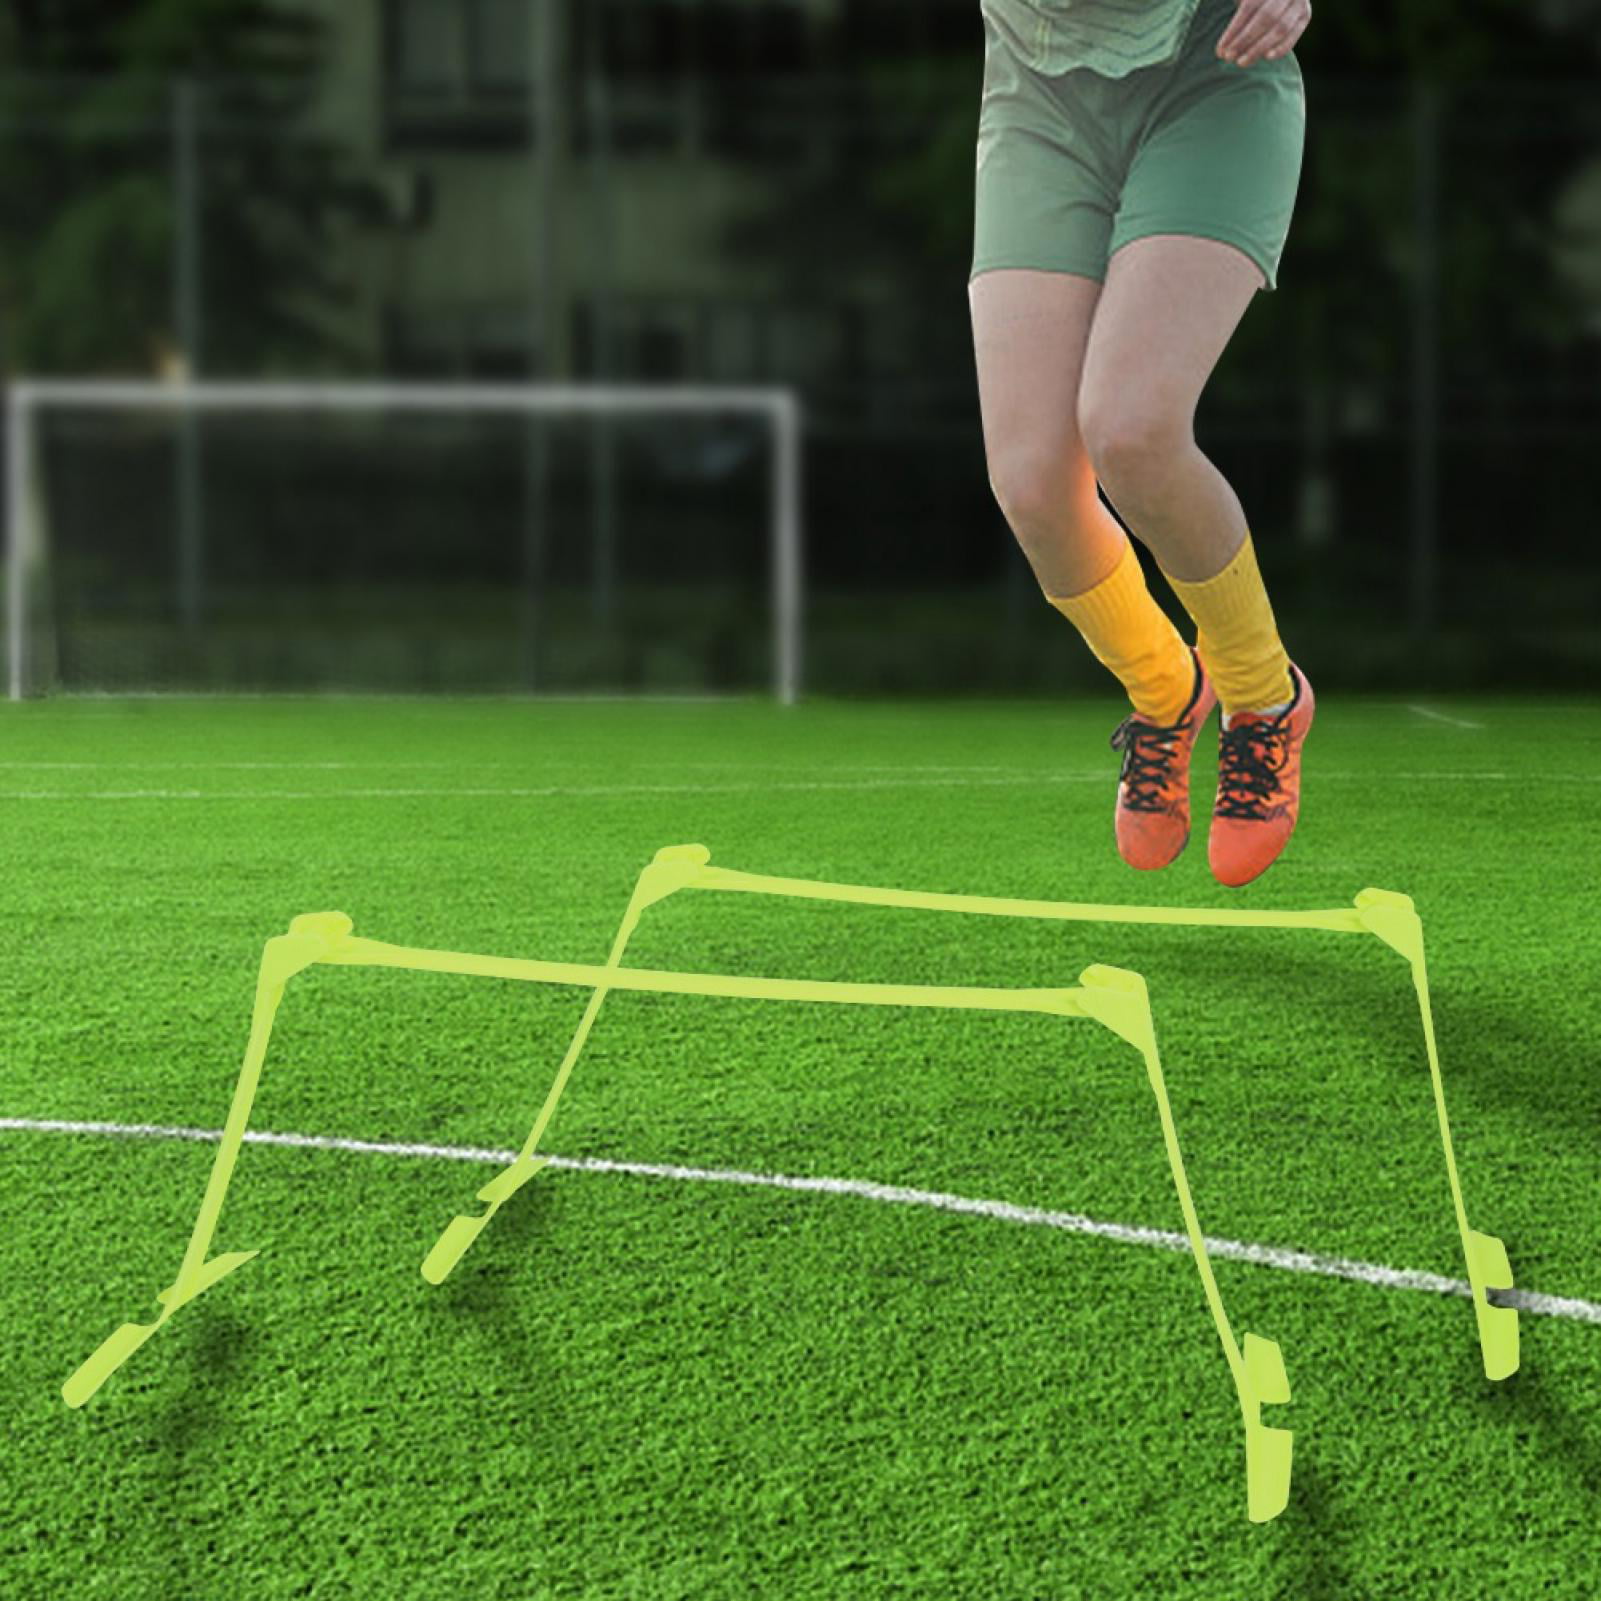 Details about   Football Hurdle Soccer Training Aids Easy To Use Durable for Athletes Coaches 